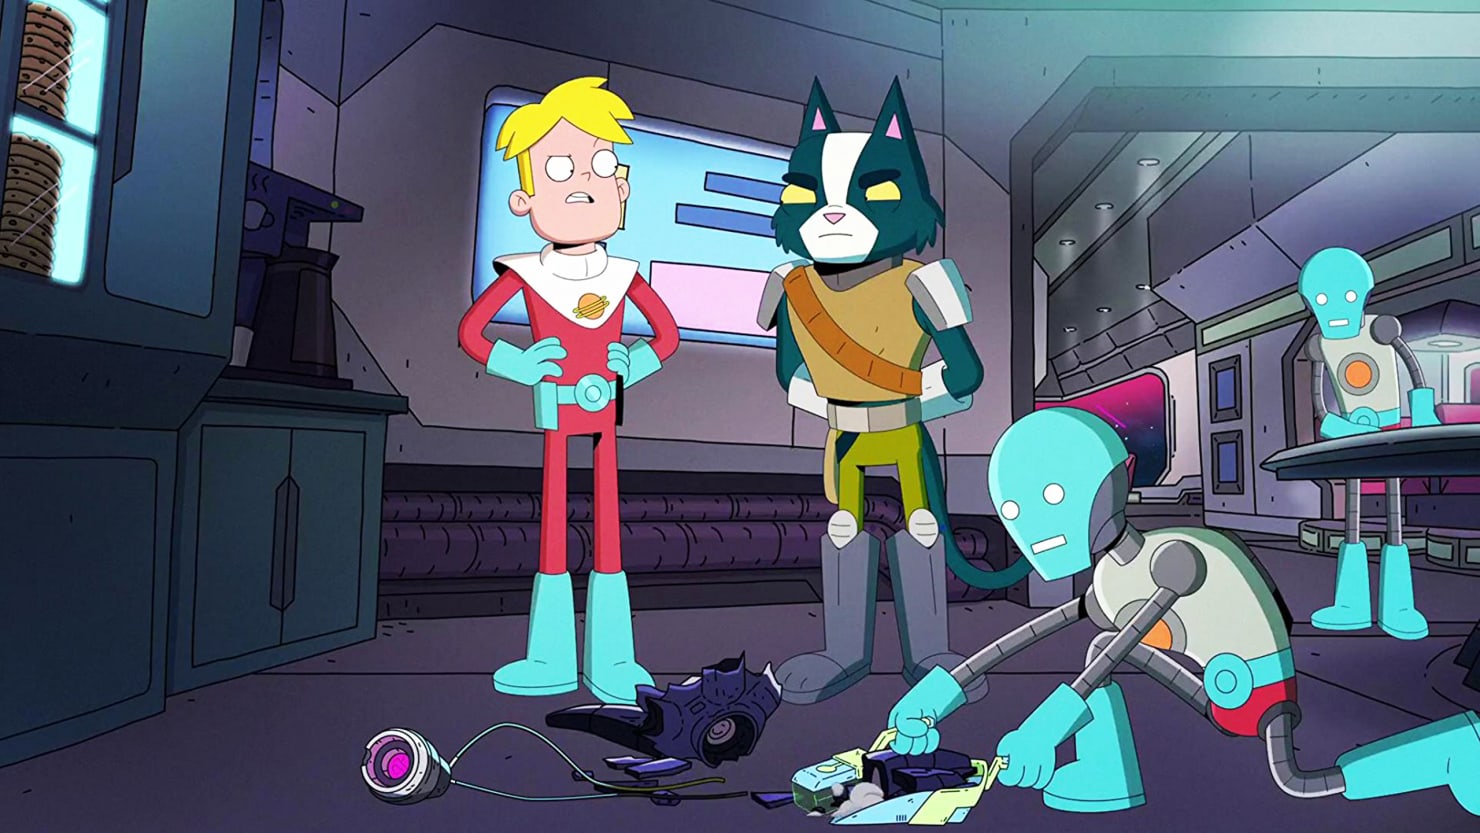 Image result for final space